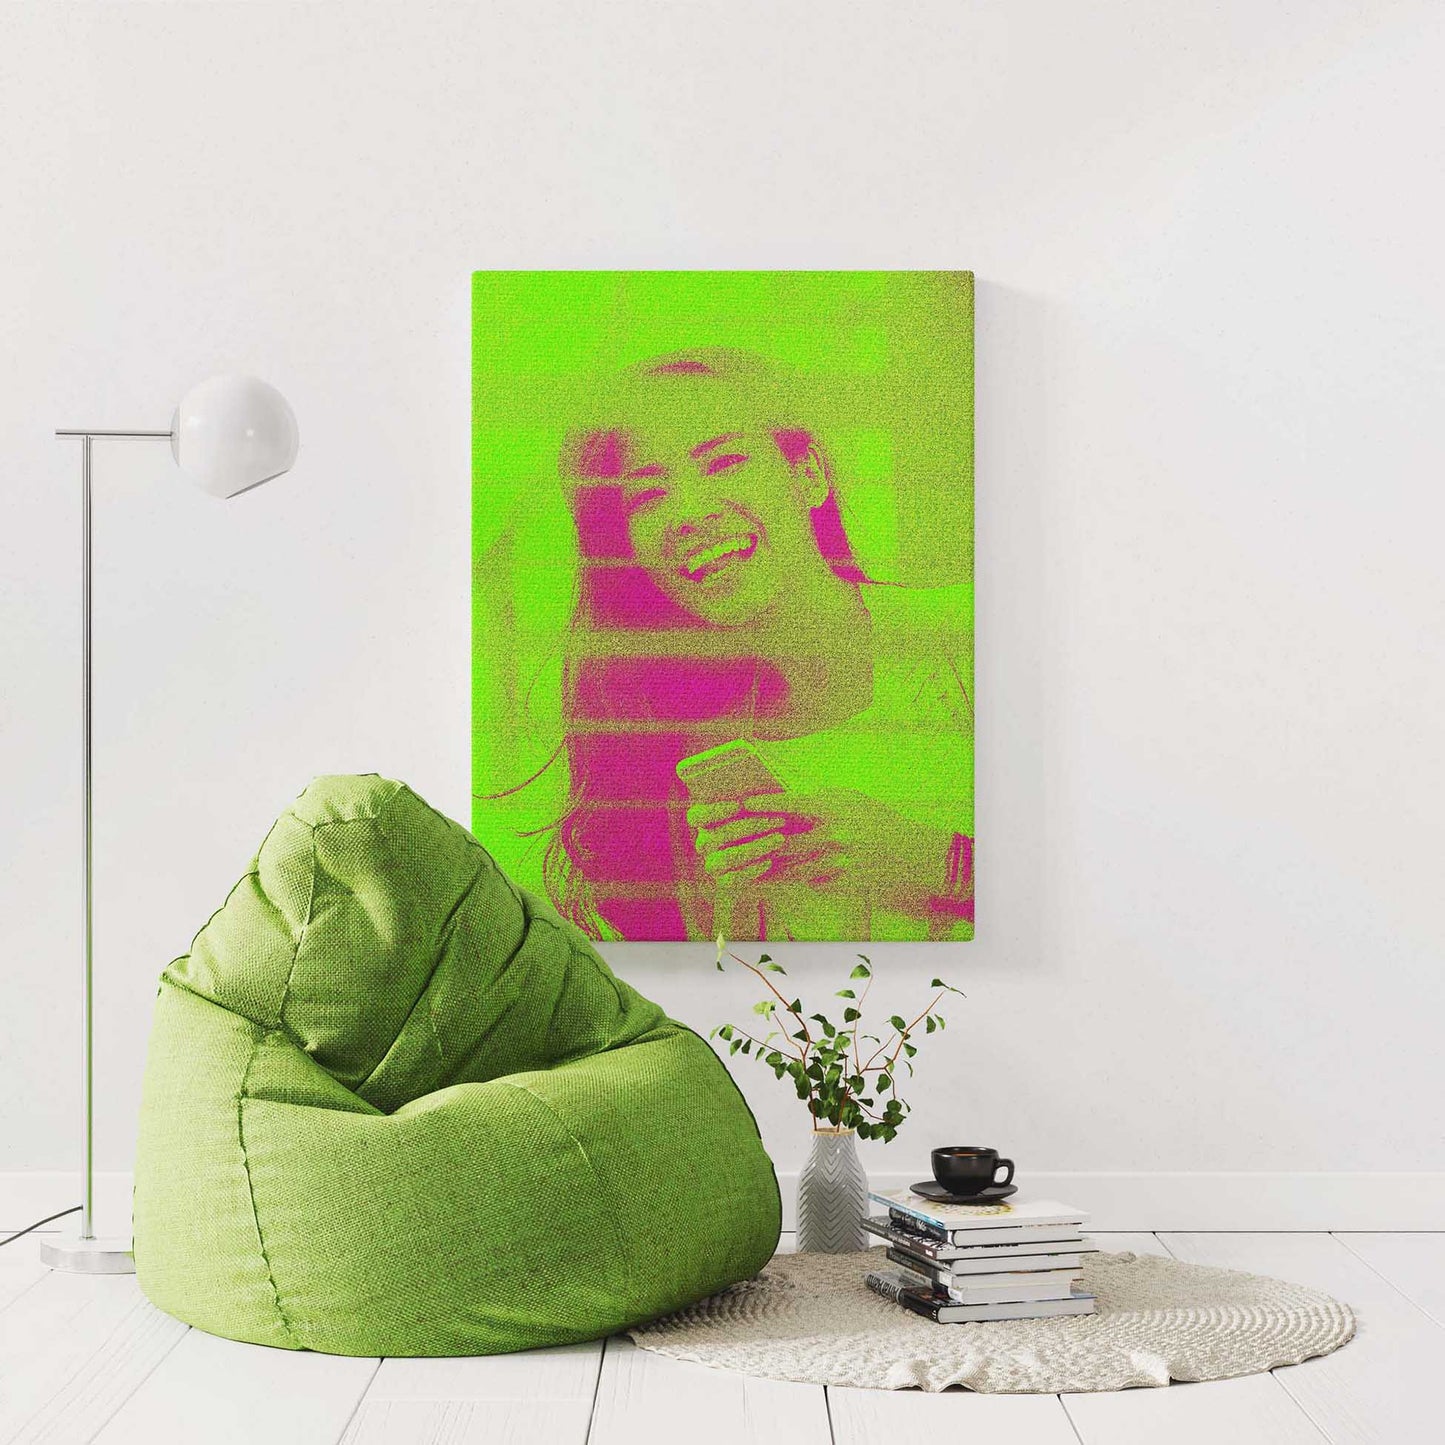 Whether it's a gift for a loved one or a special addition to your own collection, our neon green canvas will bring a unique and energetic vibe to any space. Let the bold colors symbolize fun and laughter, reminding you of the joy 